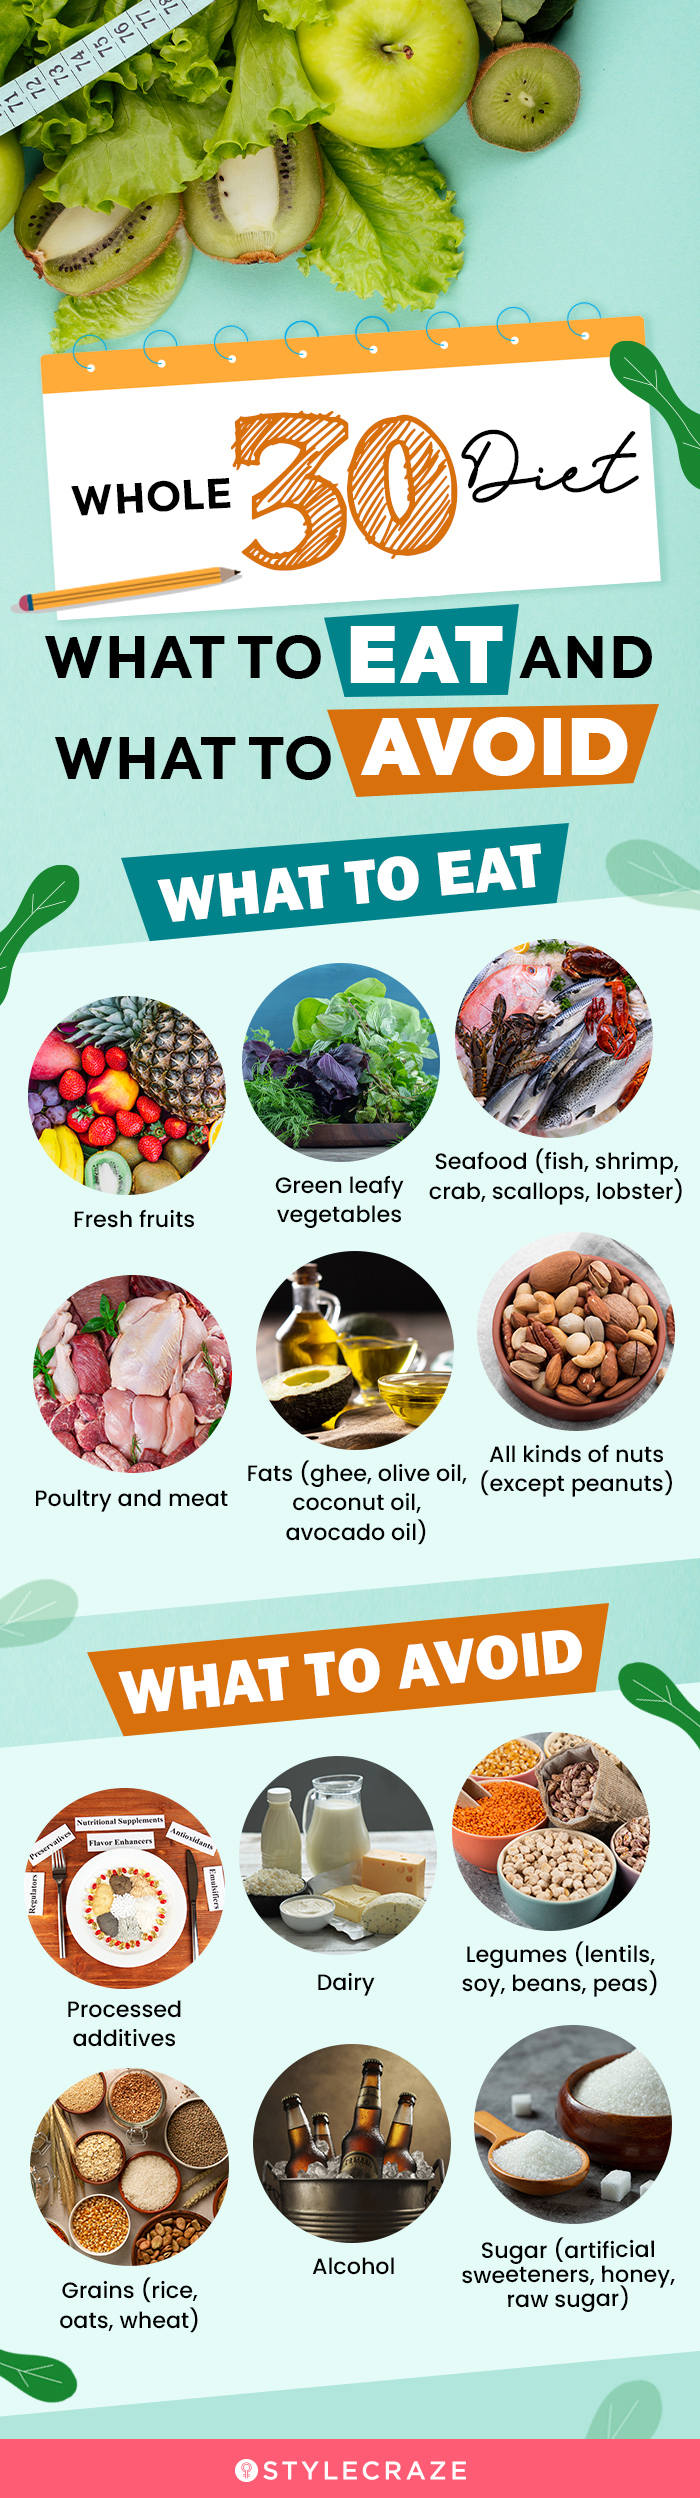 whole30 diet what to eat and what to avoid (infographic)